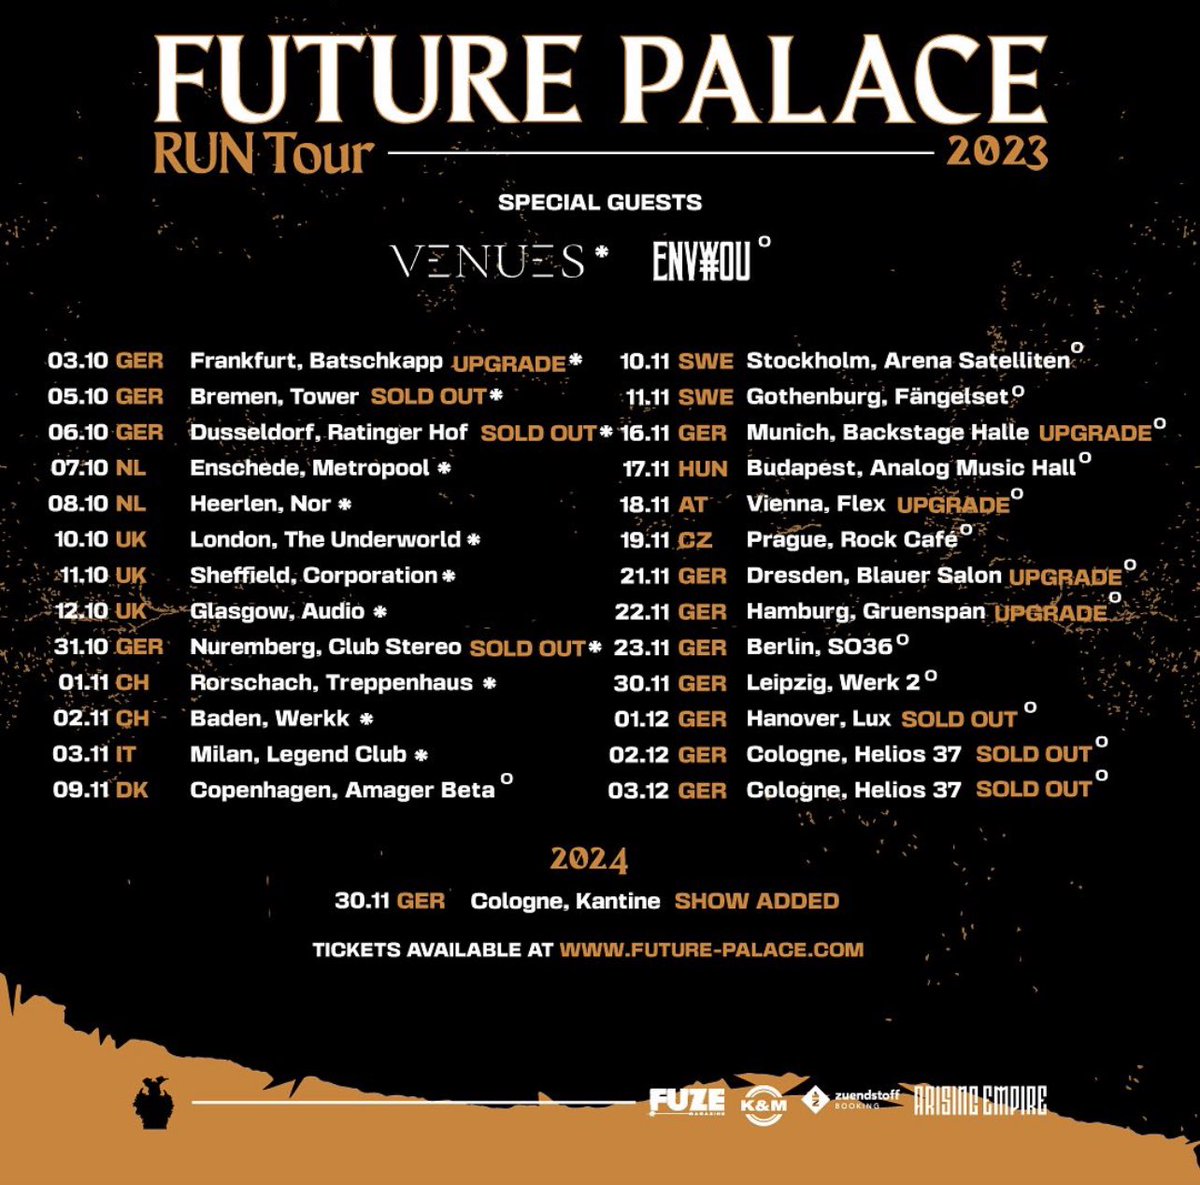 Tickets are going fast - Bremen sold out and Vienna upgraded for our headline tour! Get yours at future-palace.com